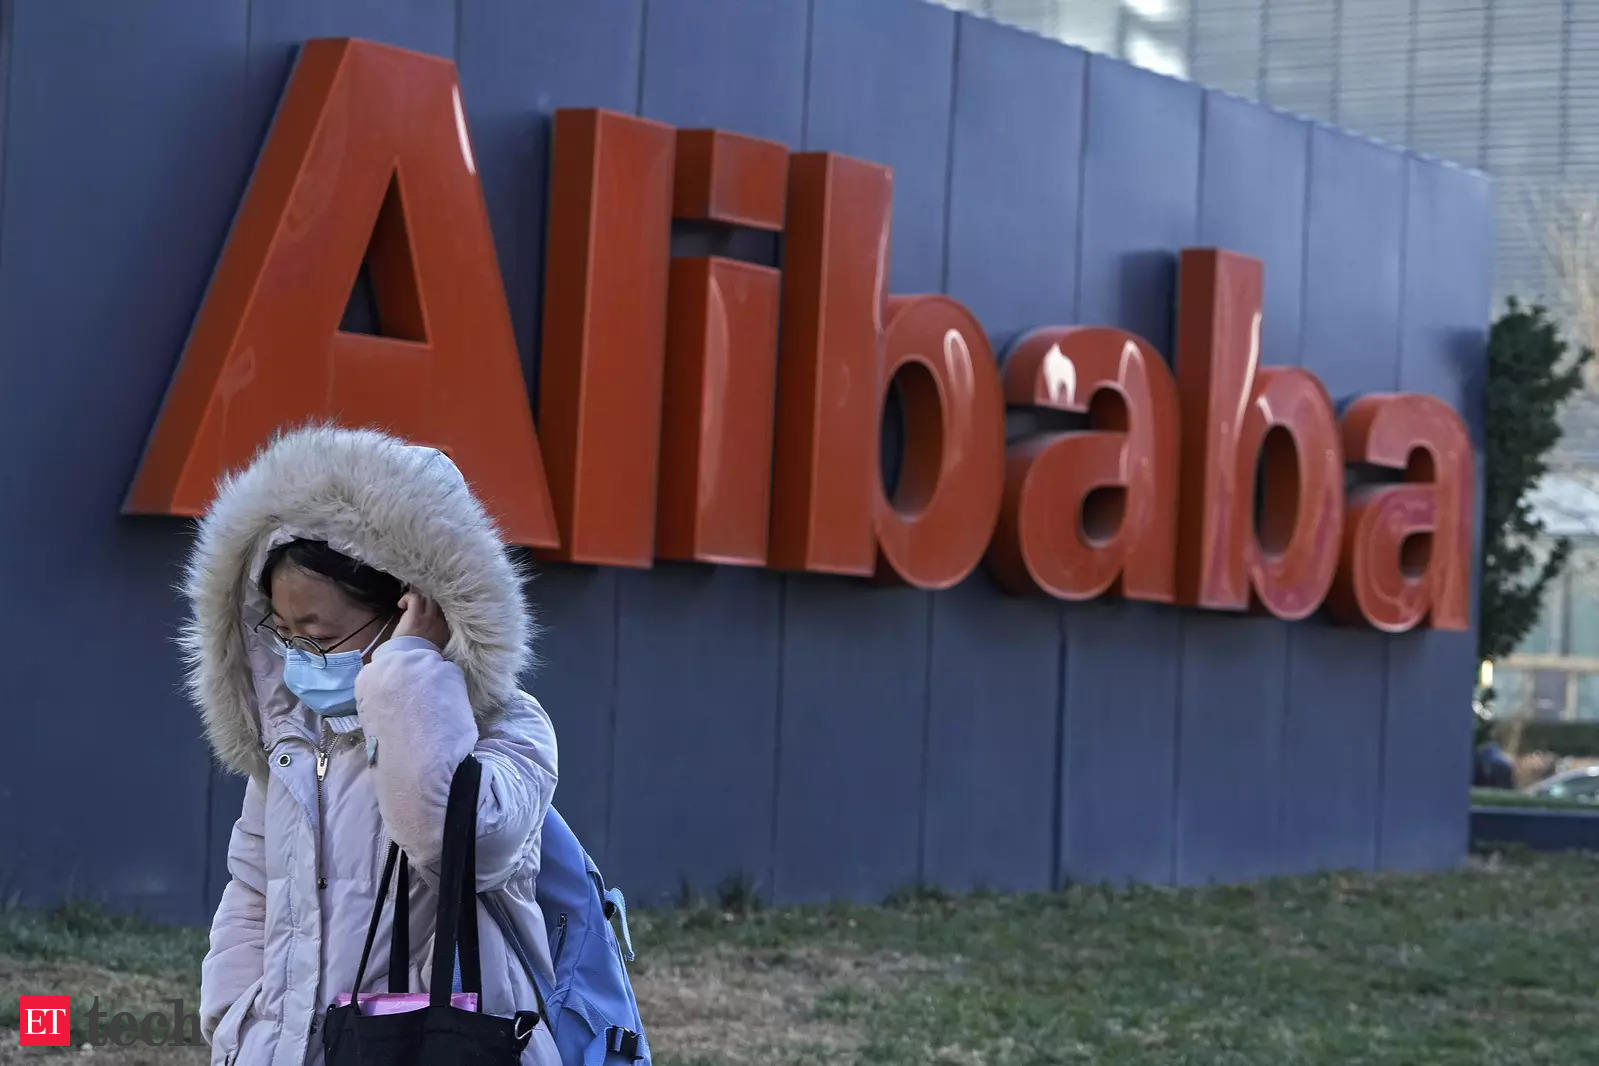 alibaba group: US is said to examine Alibaba's cloud unit for 